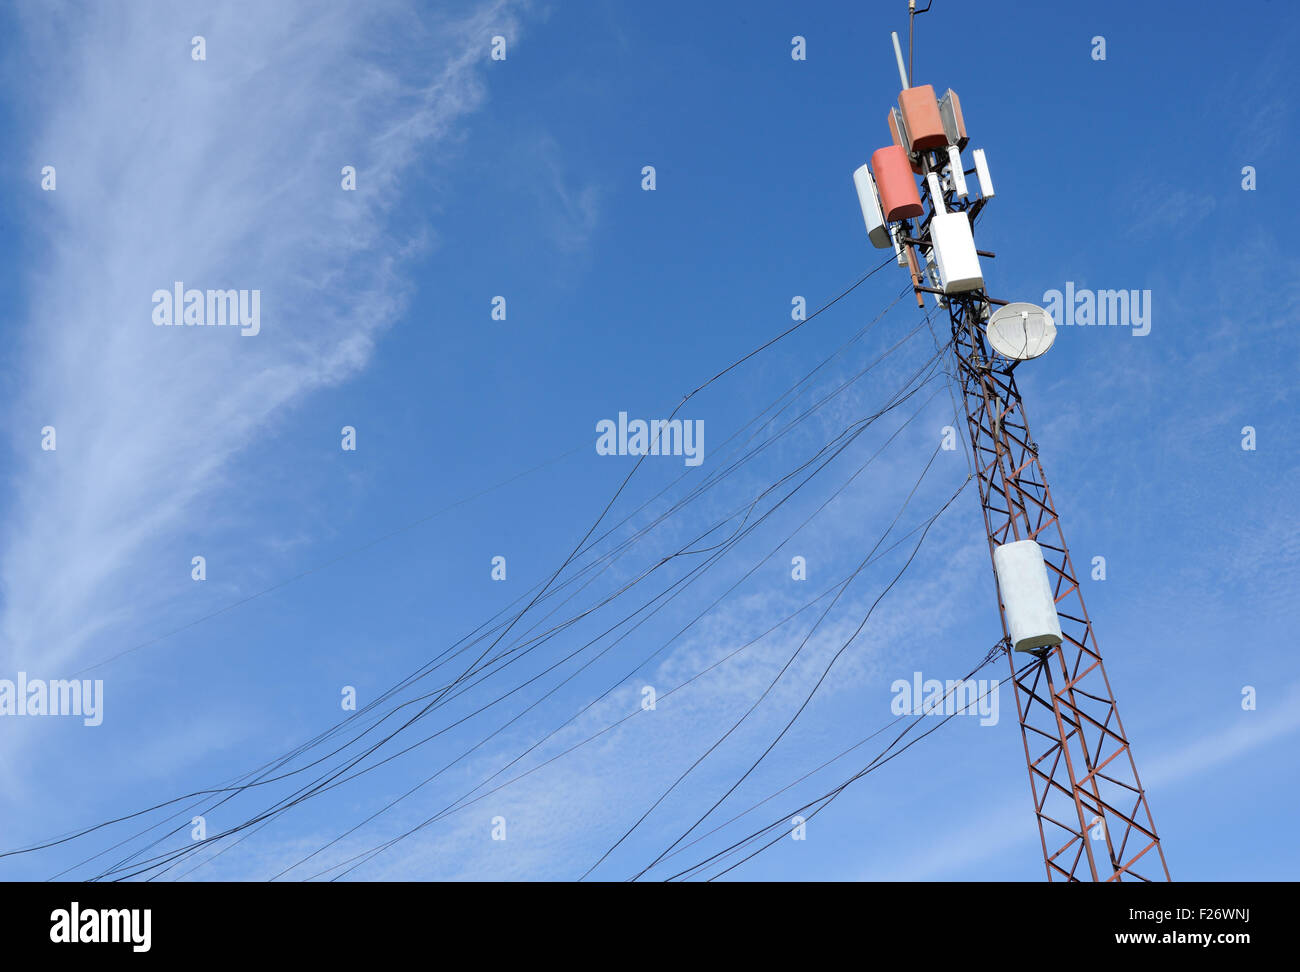 A telecommunications tower with trailing cables in the thirteenth century Berat Castle, Kalaja e Beratit. Stock Photo